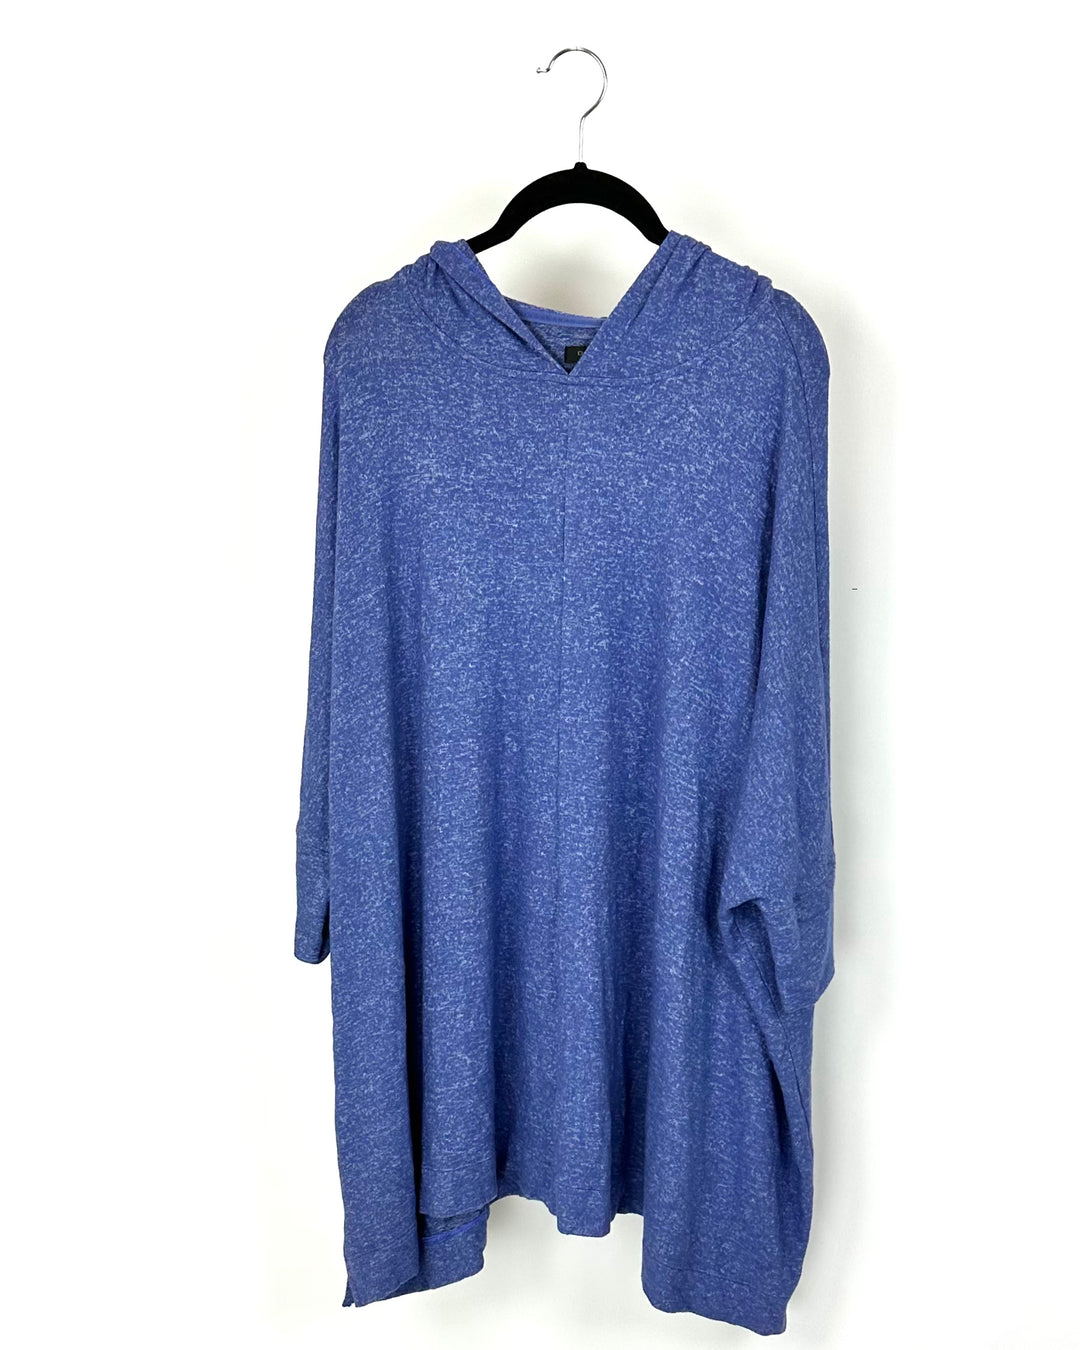 Blue Crop Sleeve Nightgown - Small